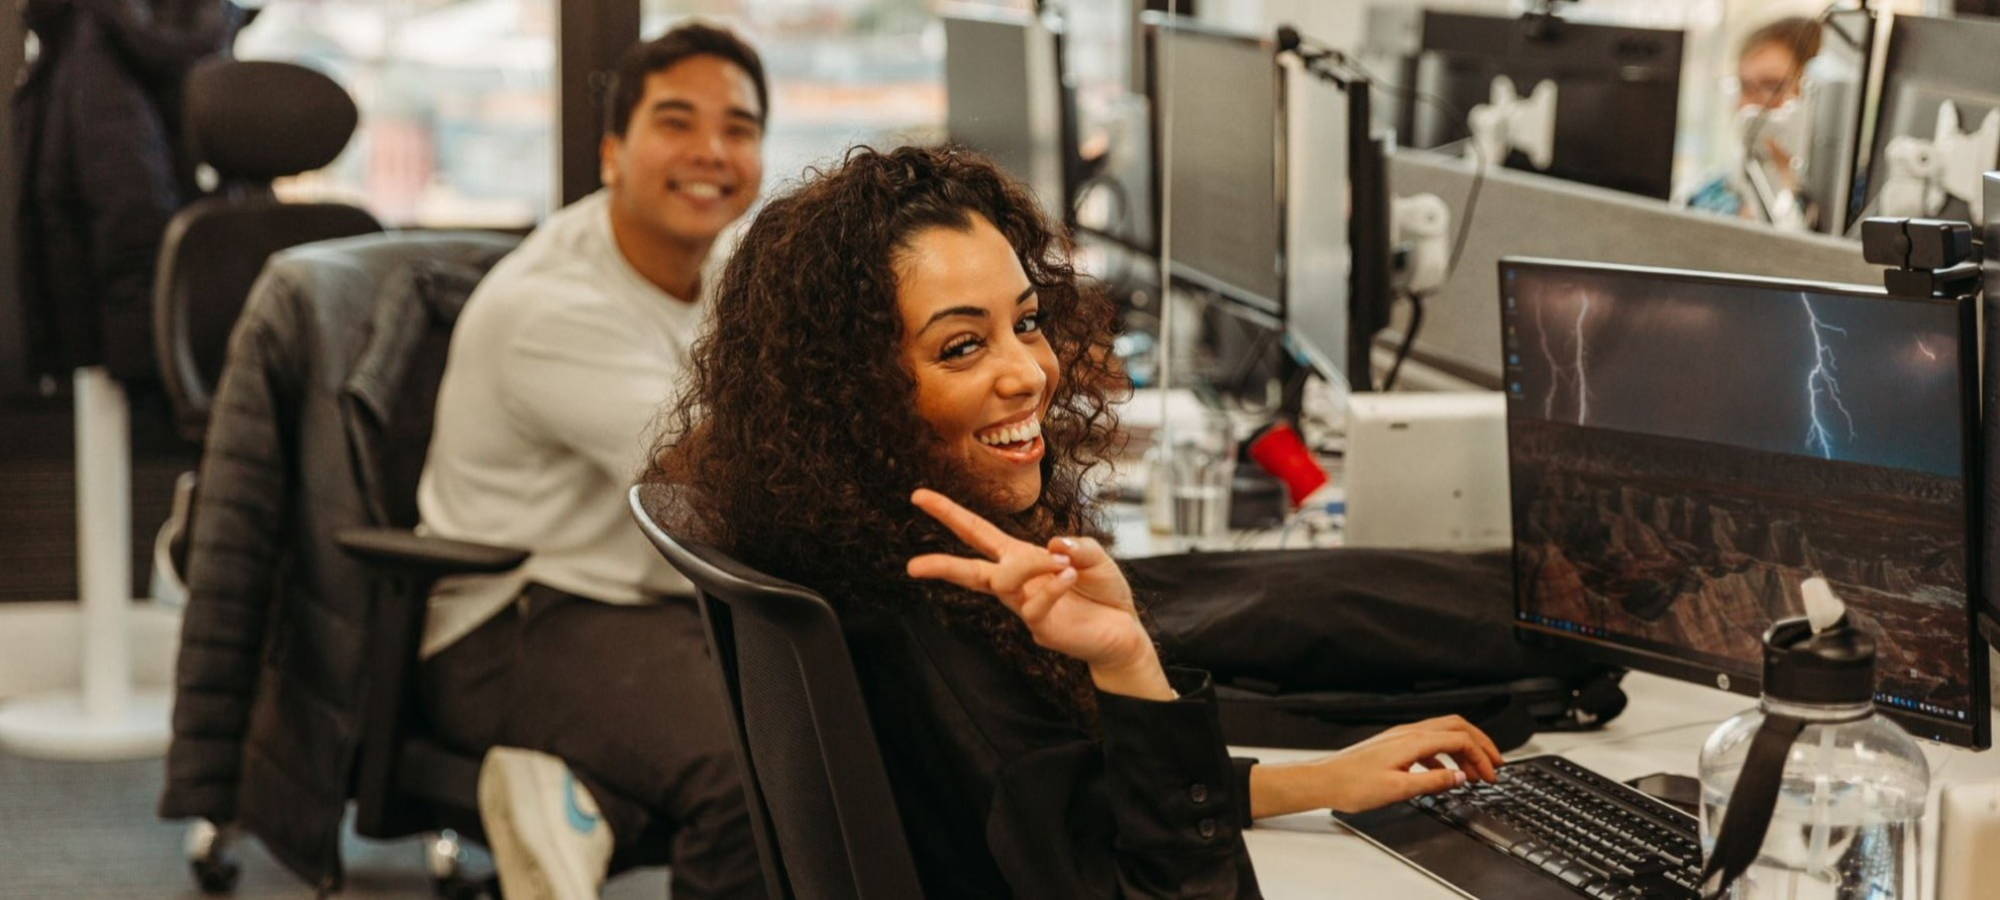 male and female employees in the ersg office smiling 